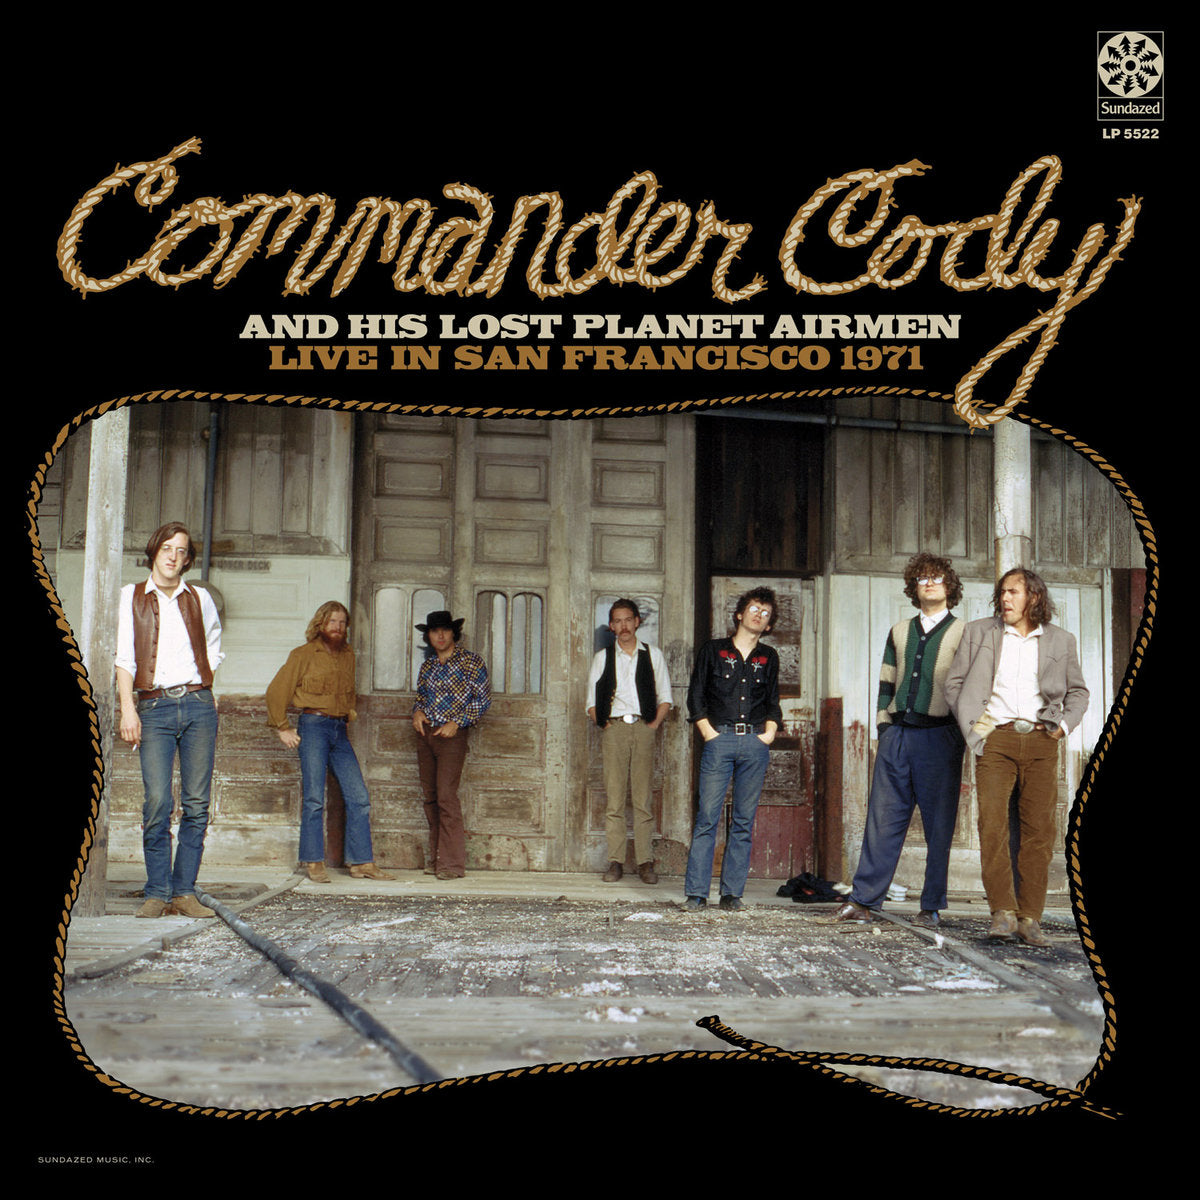 Commander Cody and His Lost Planet Airmen - Live In San Francisco 1971